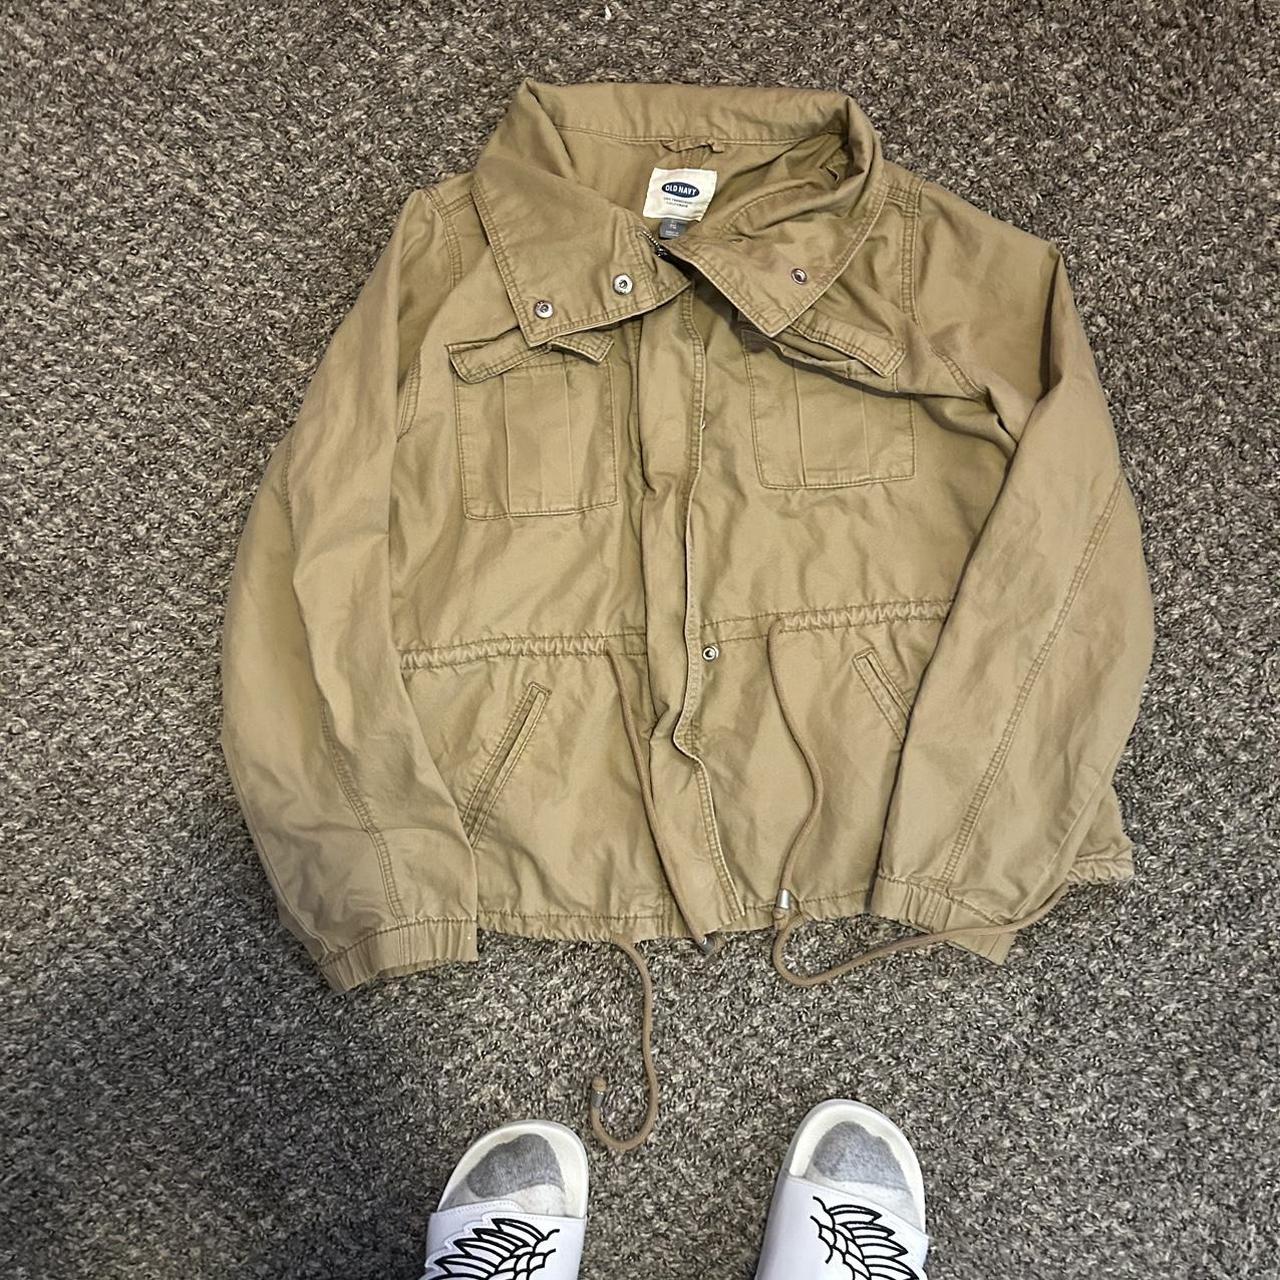 Old navy jacket says size xl more like a cropped large - Depop